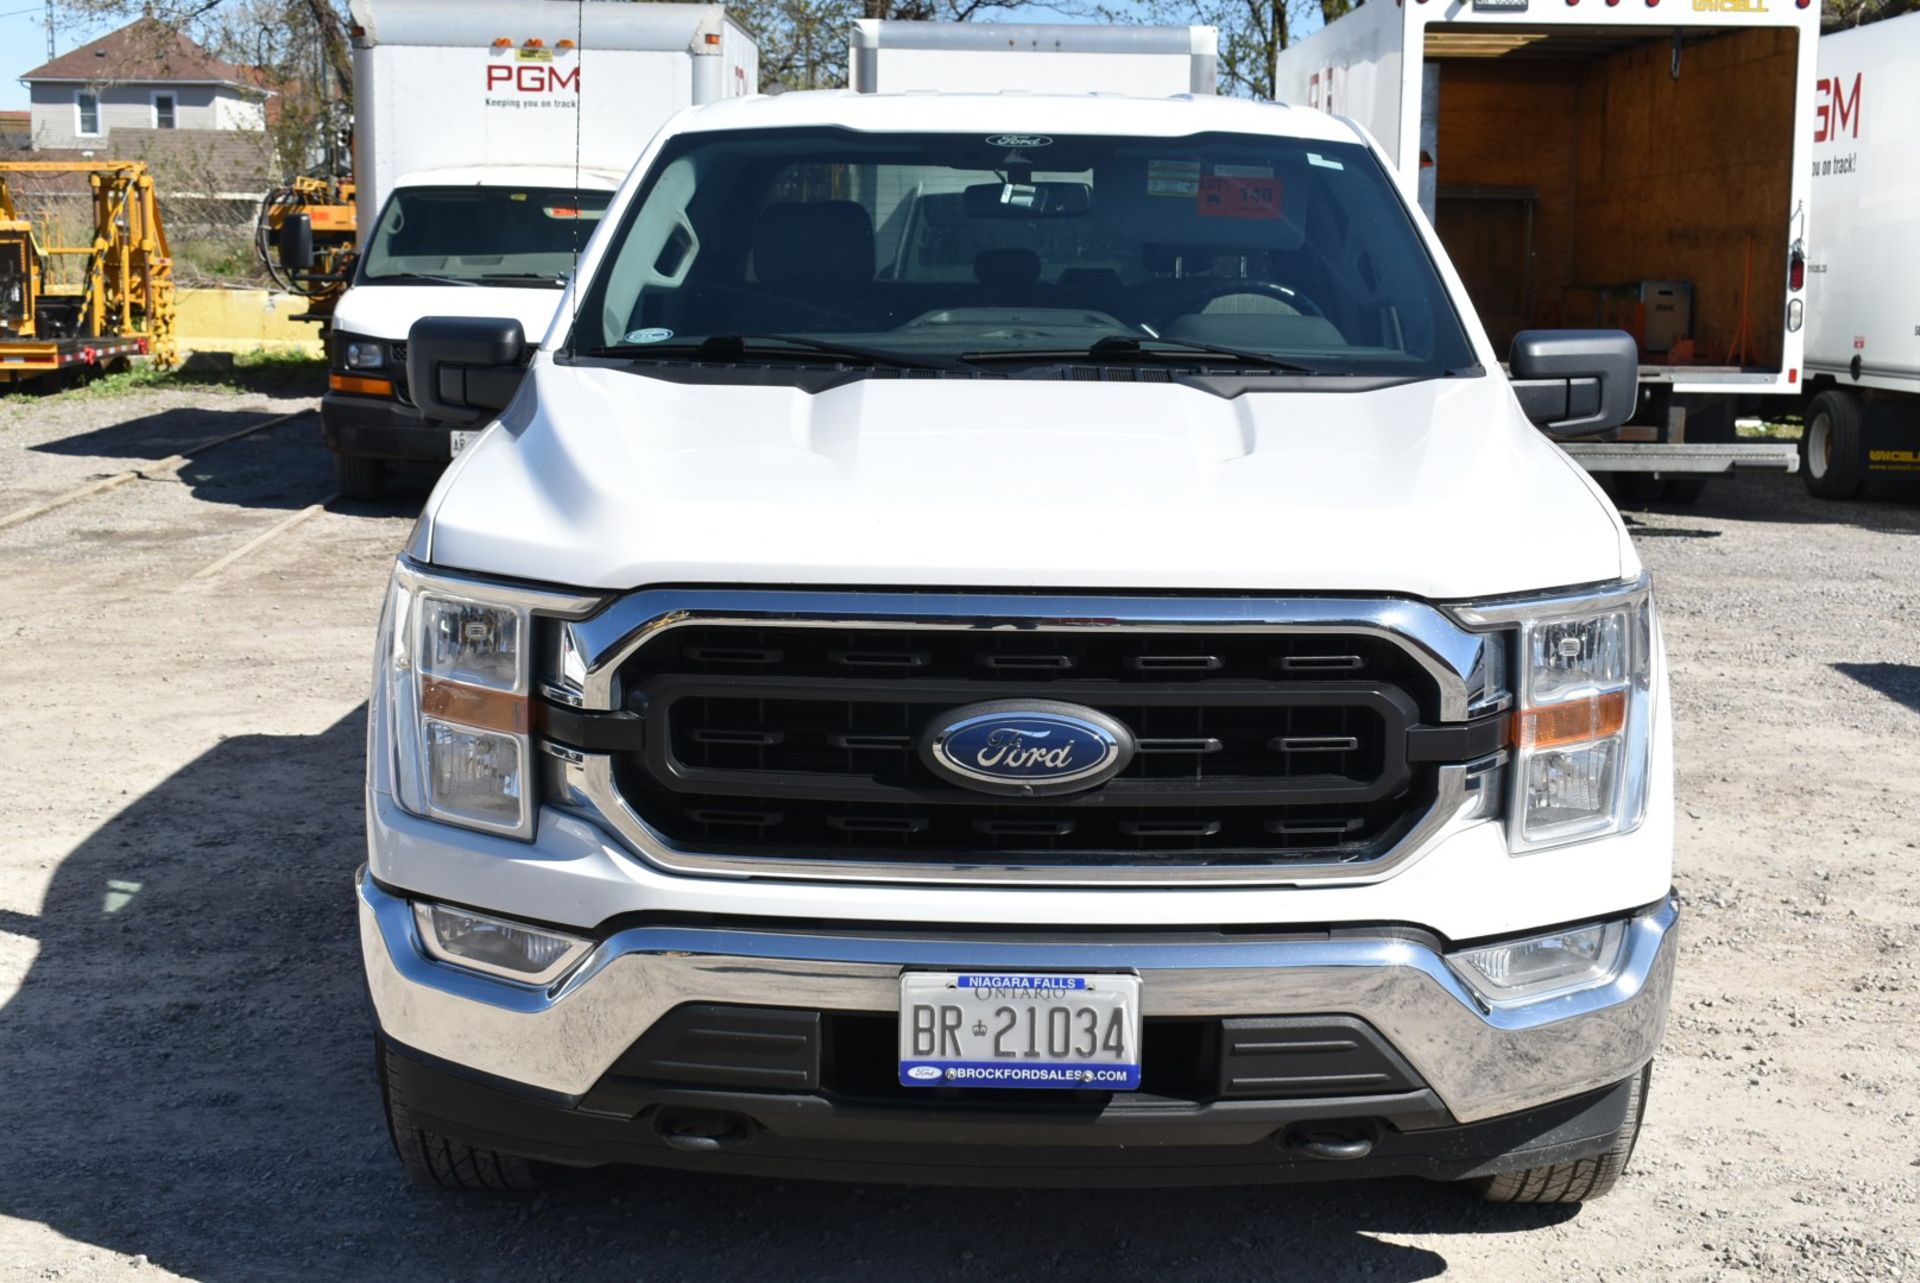 FORD (2021) F150 XLT CREW CAB PICKUP TRUCK WITH 3.5L 6 CYL. GAS ENGINE, AUTO. TRANSMISSION, 4X4, - Image 6 of 15